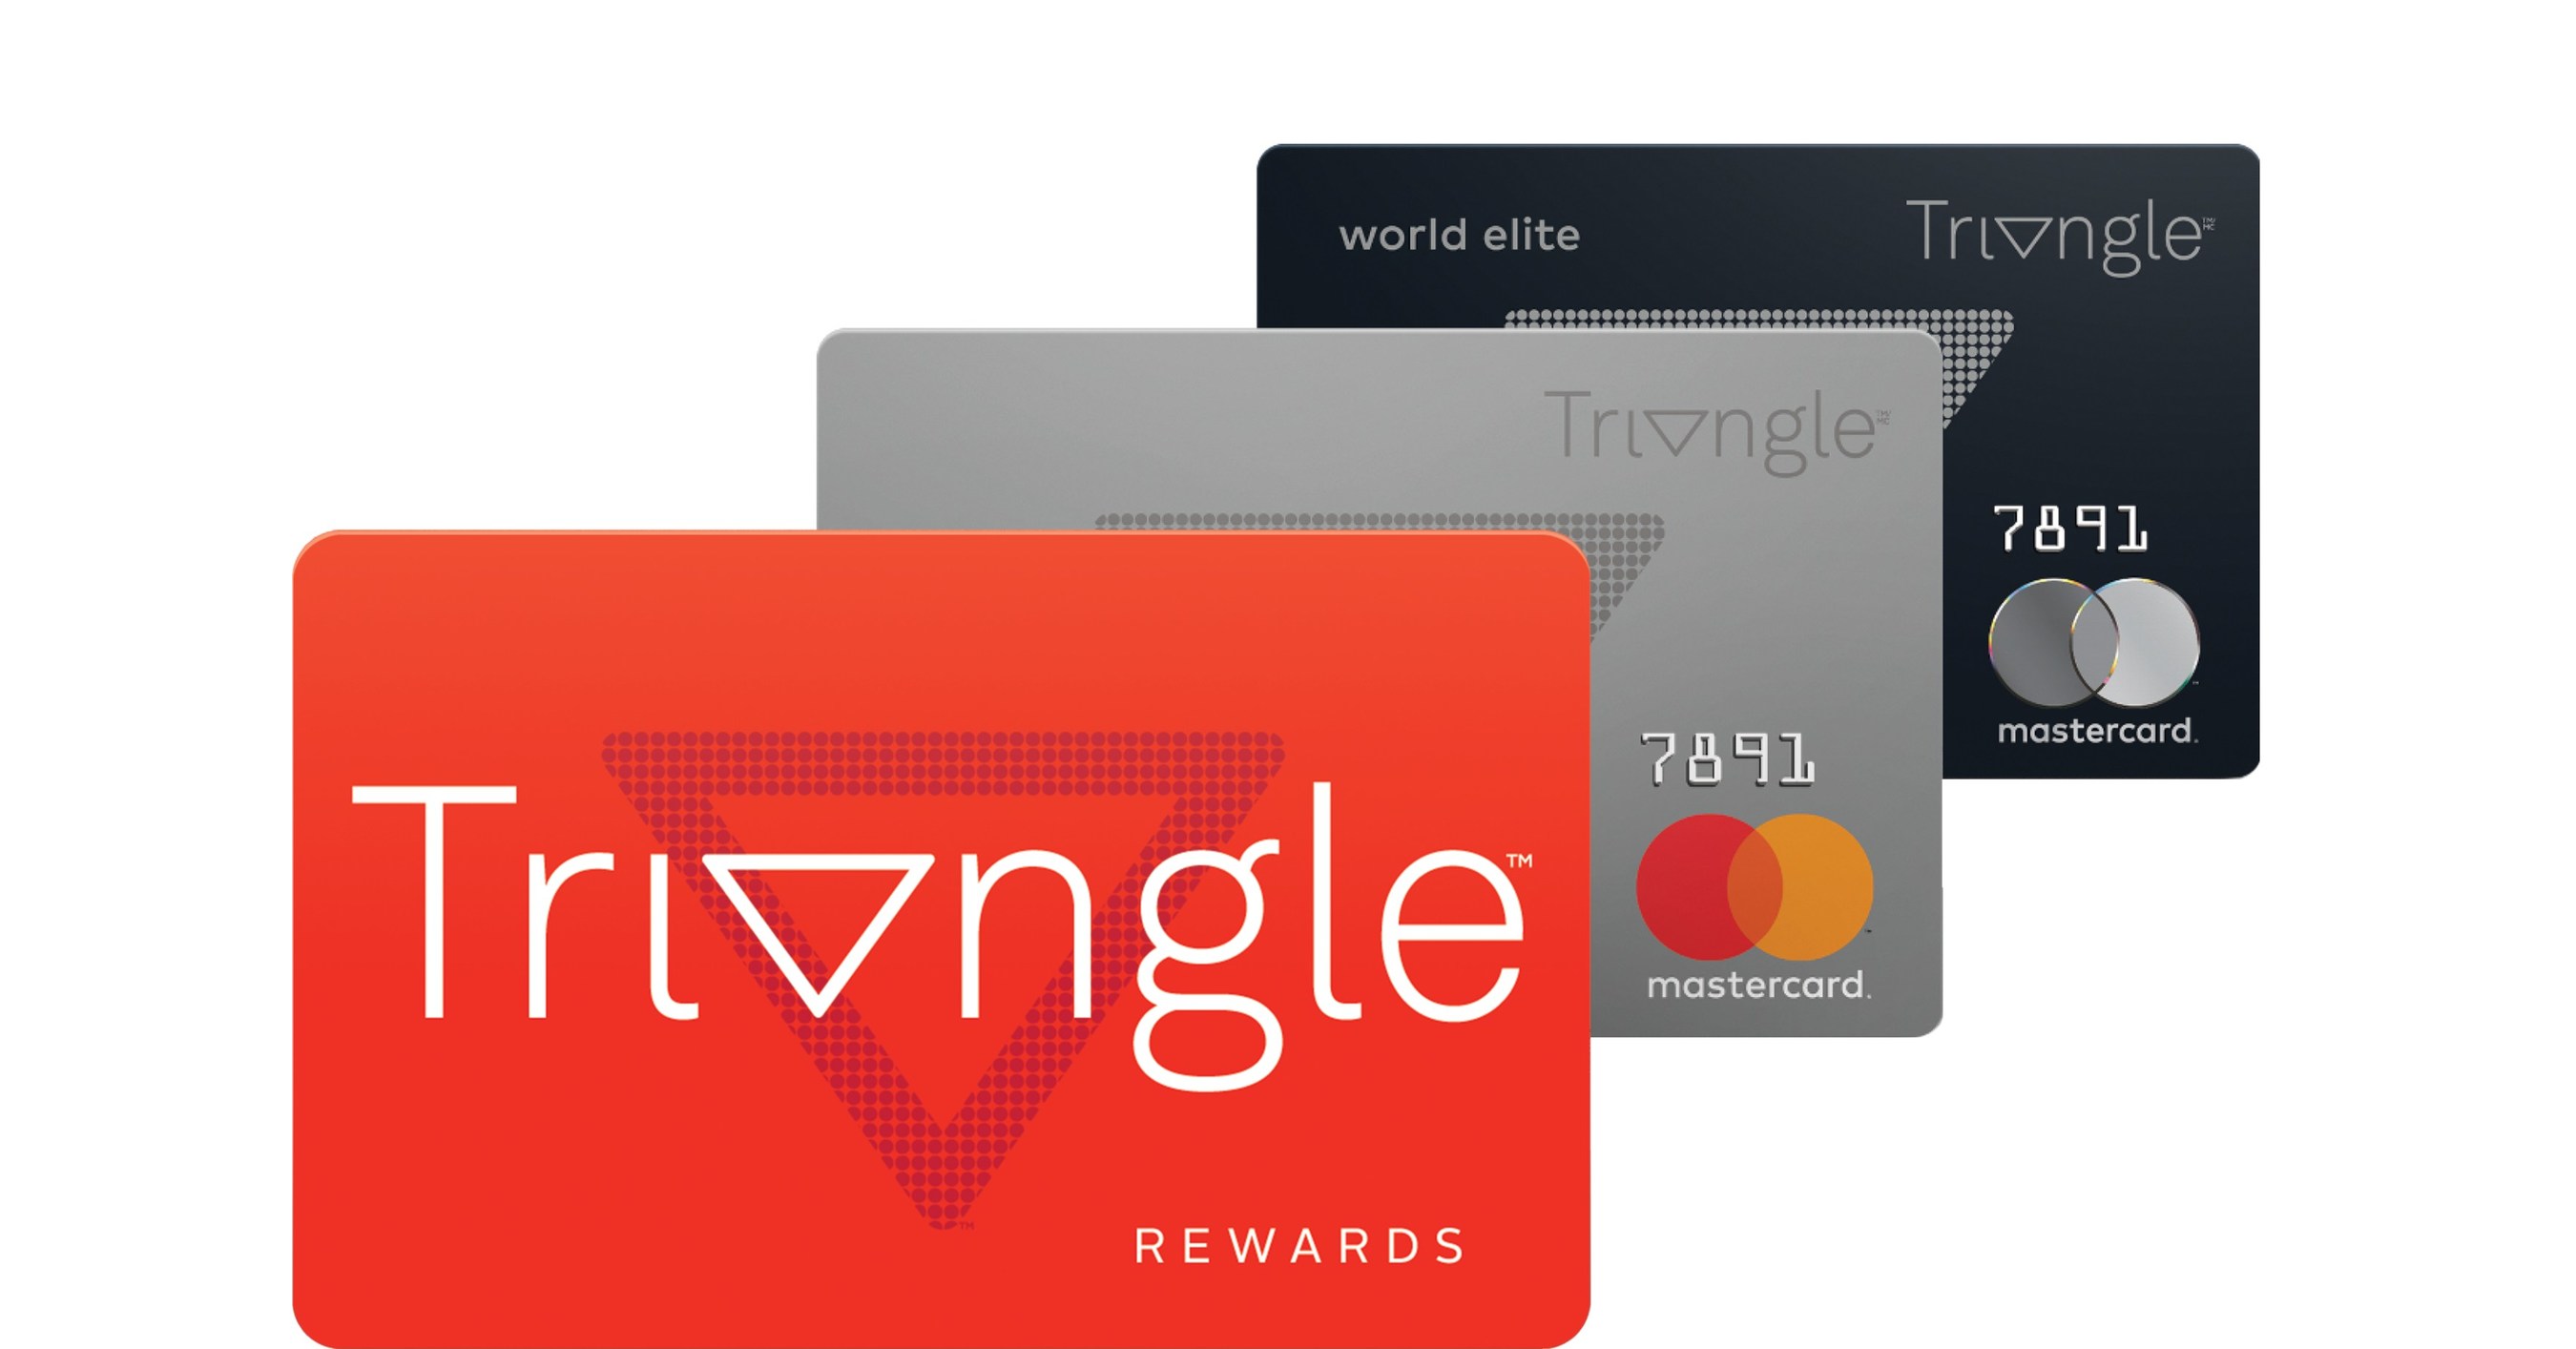 Canadian Tire Corporation evolving its iconic loyalty program with the  introduction of Triangle Rewards™